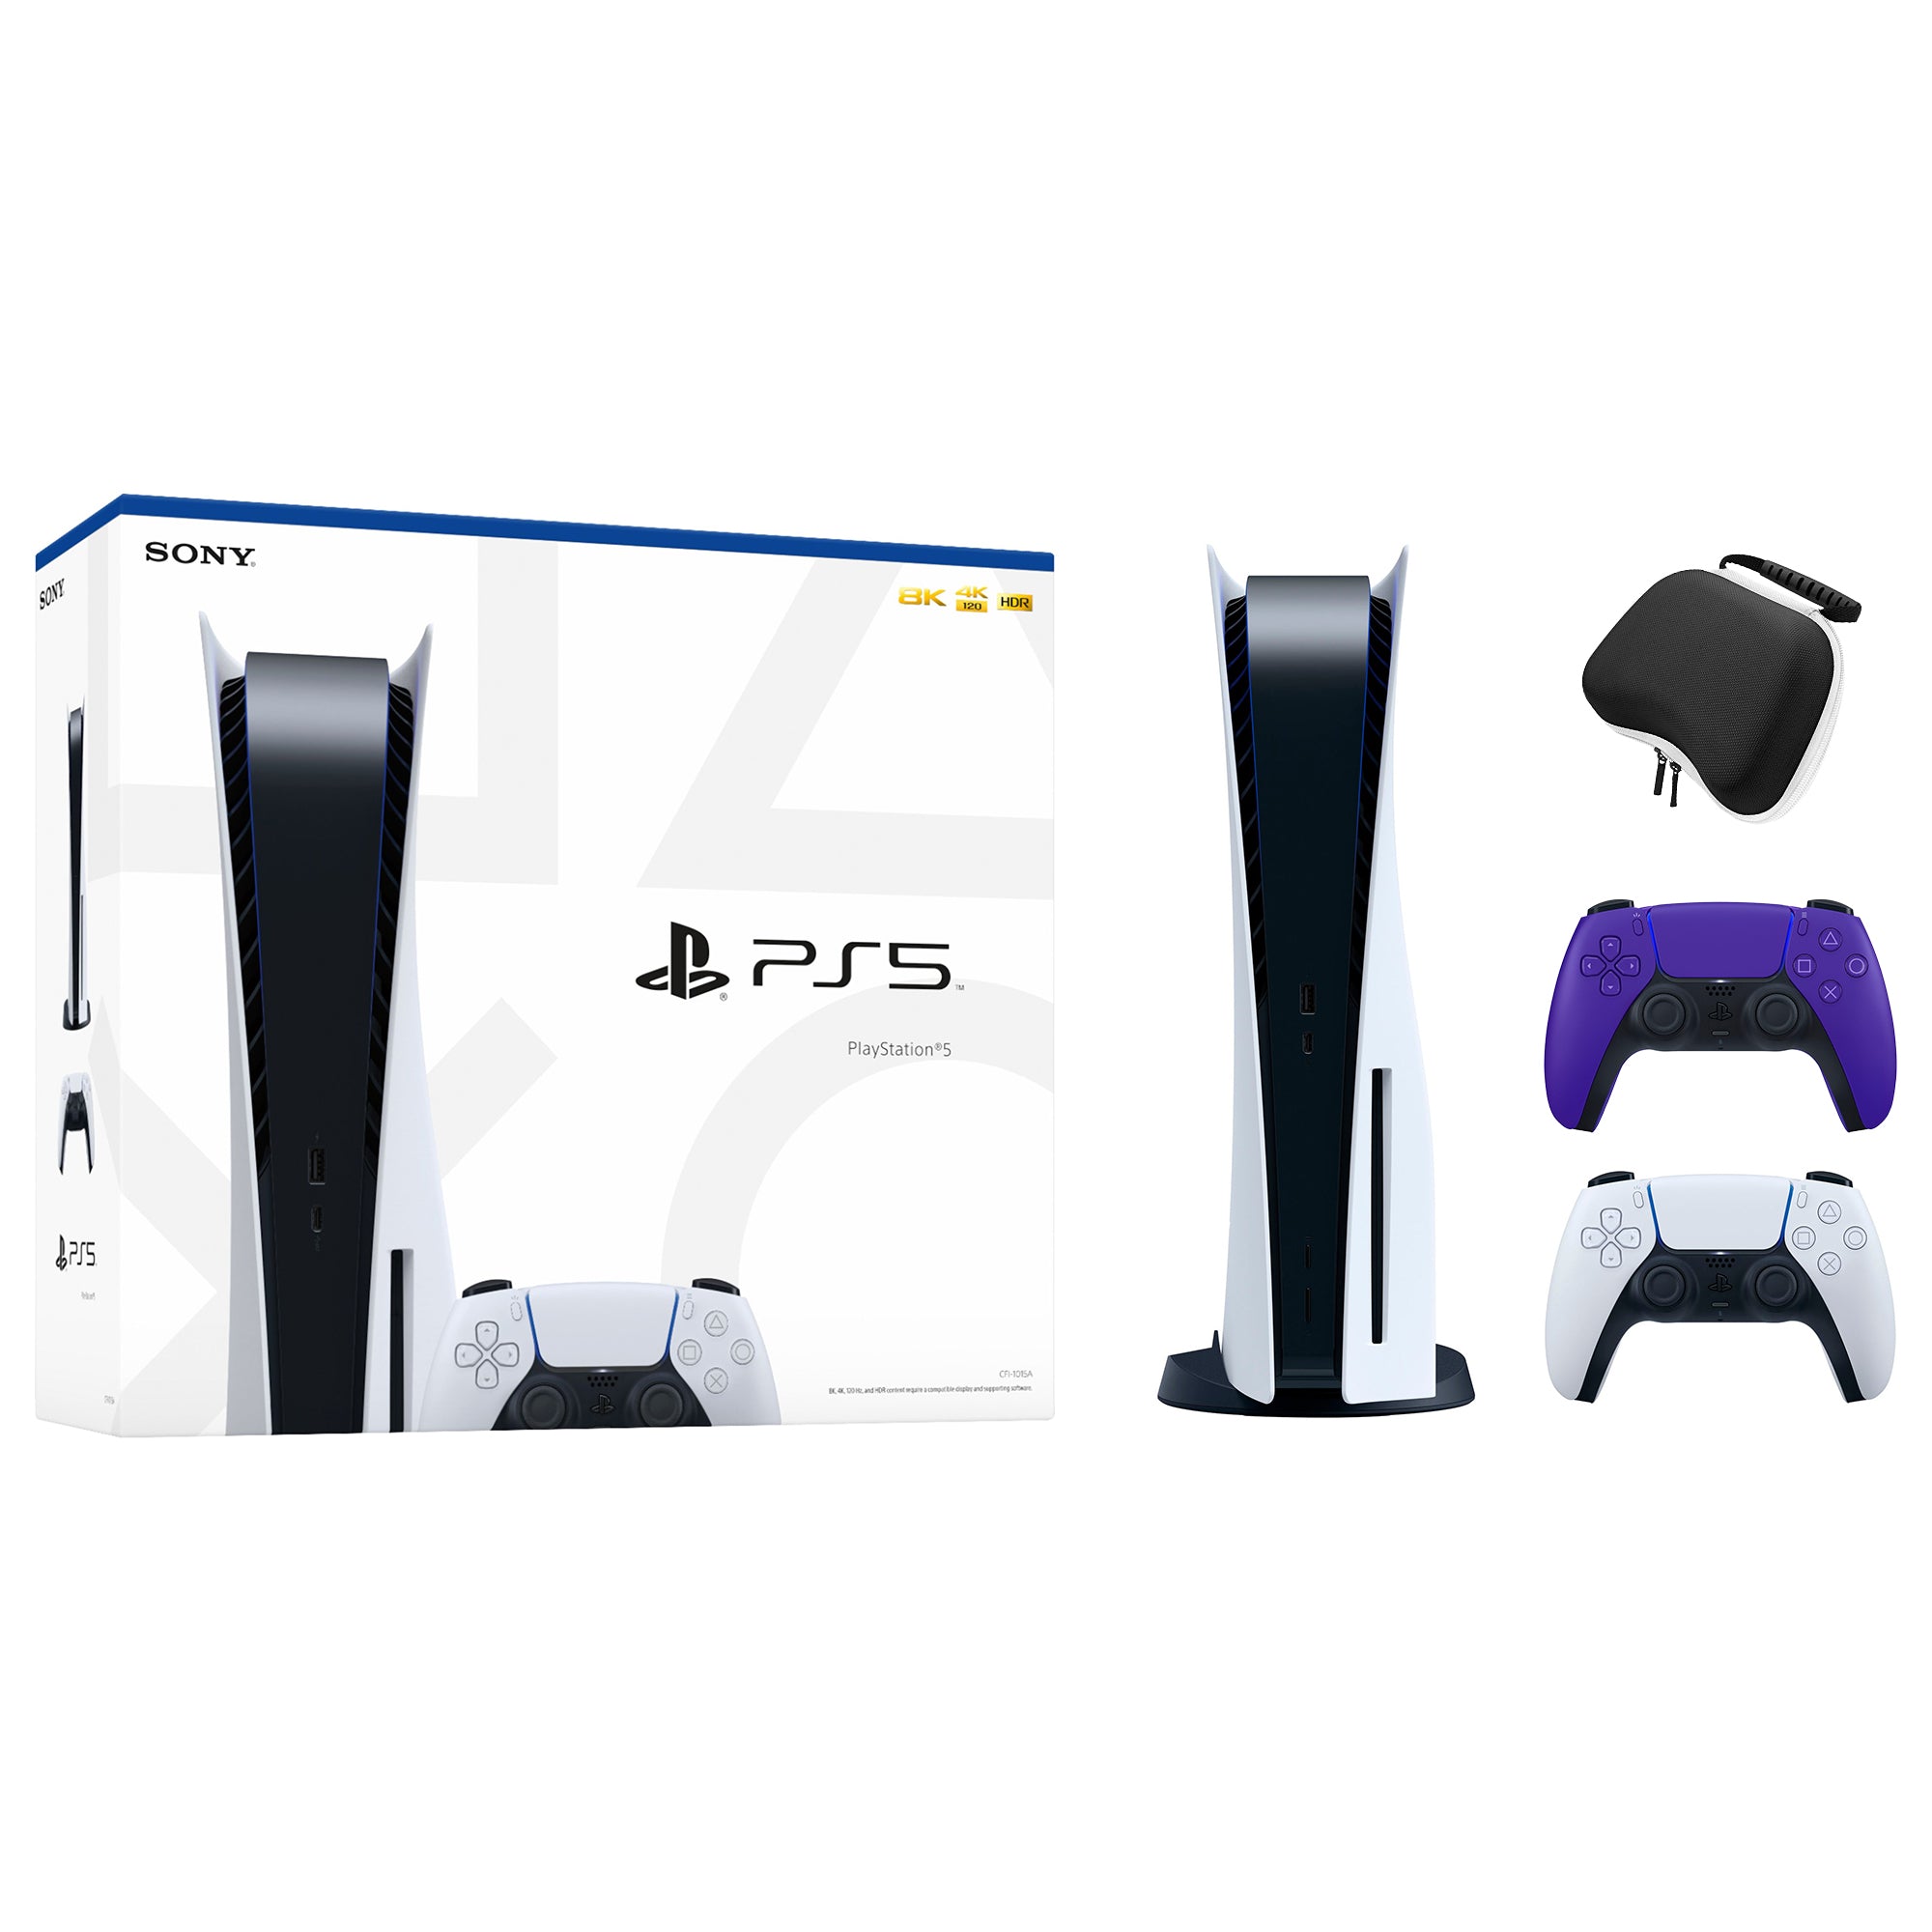 PlayStation 5 Disc Edition with Two Controllers White and Galactic Purple DualSense and Mytrix Hard Shell Protective Controller Case - PS5 Gaming Console